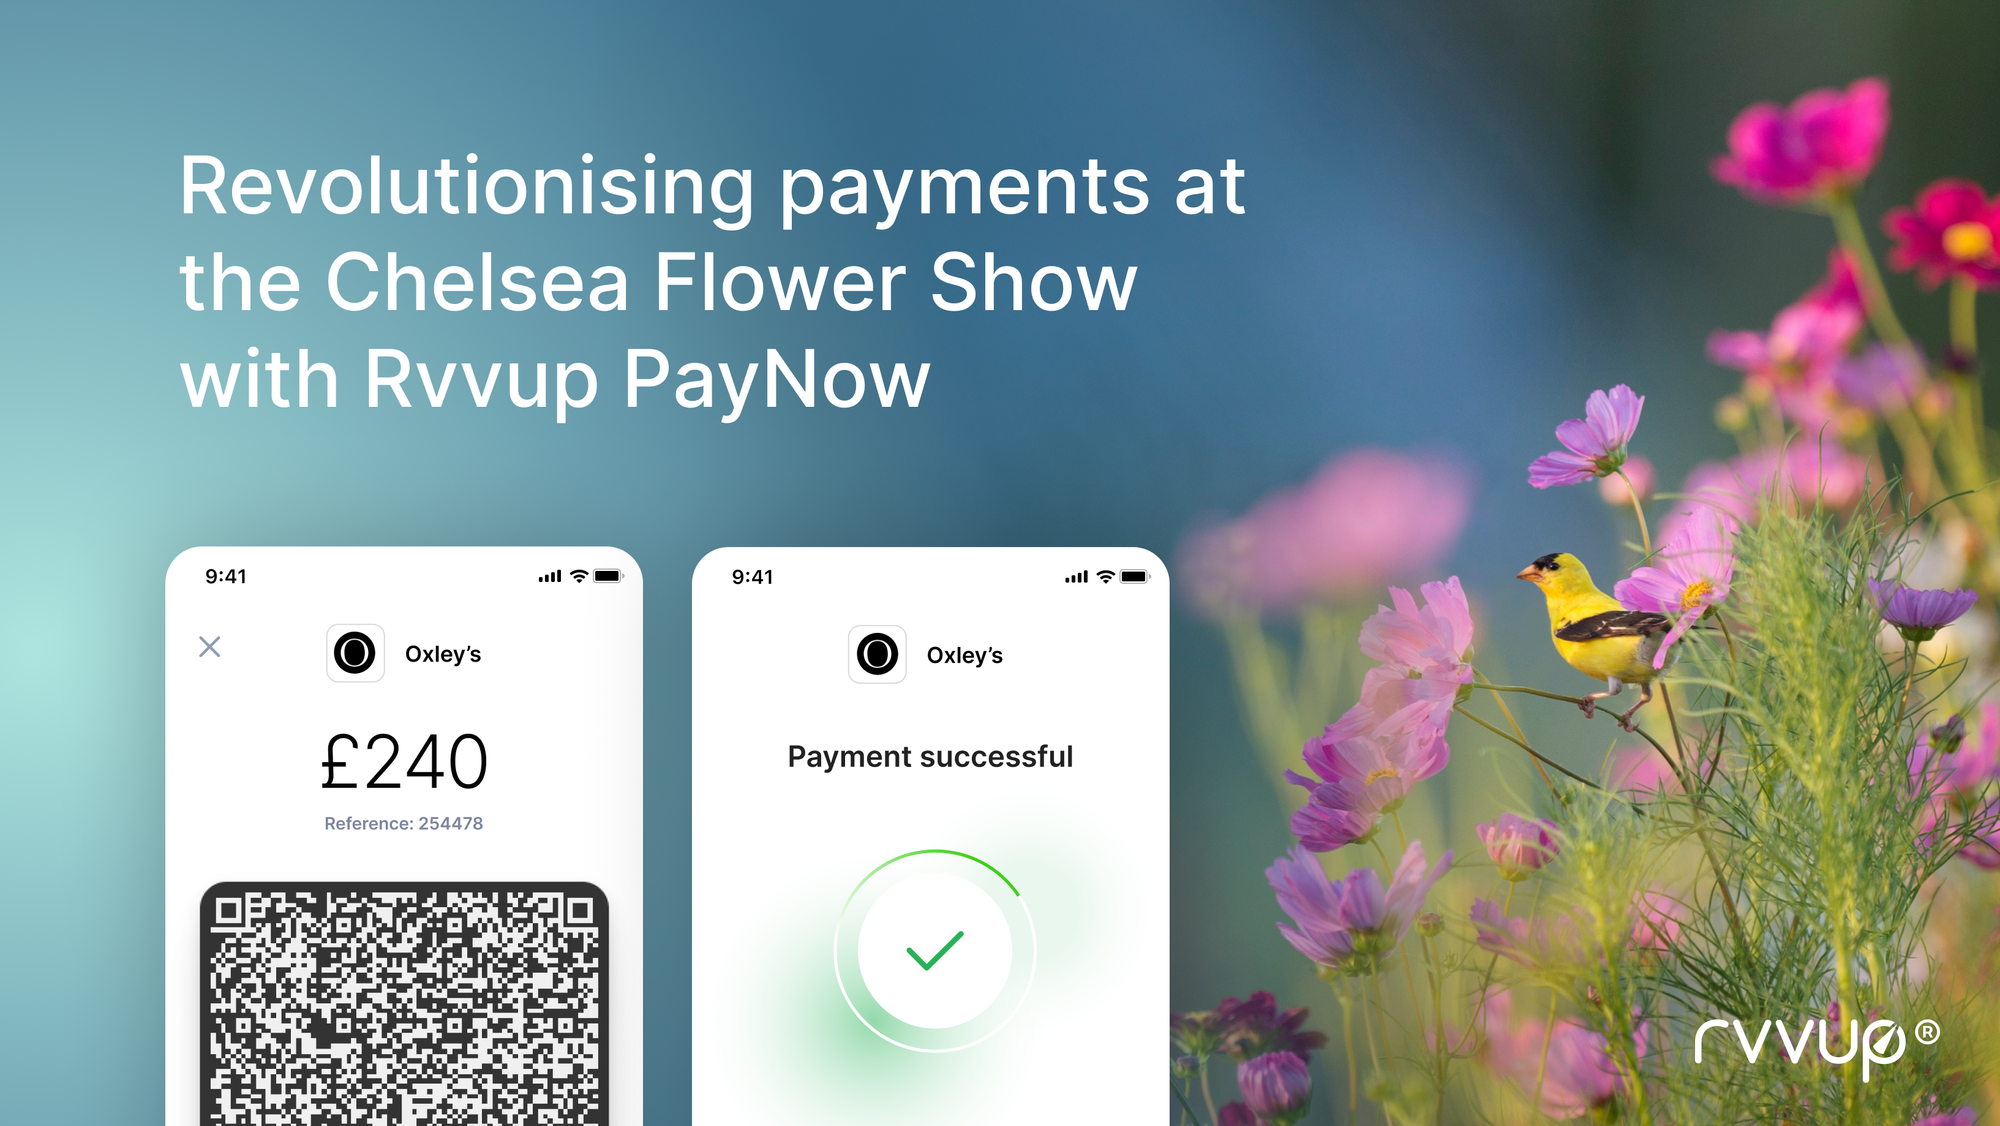 Revolutionising payments at the Chelsea Flower Show with Rvvup PayNow